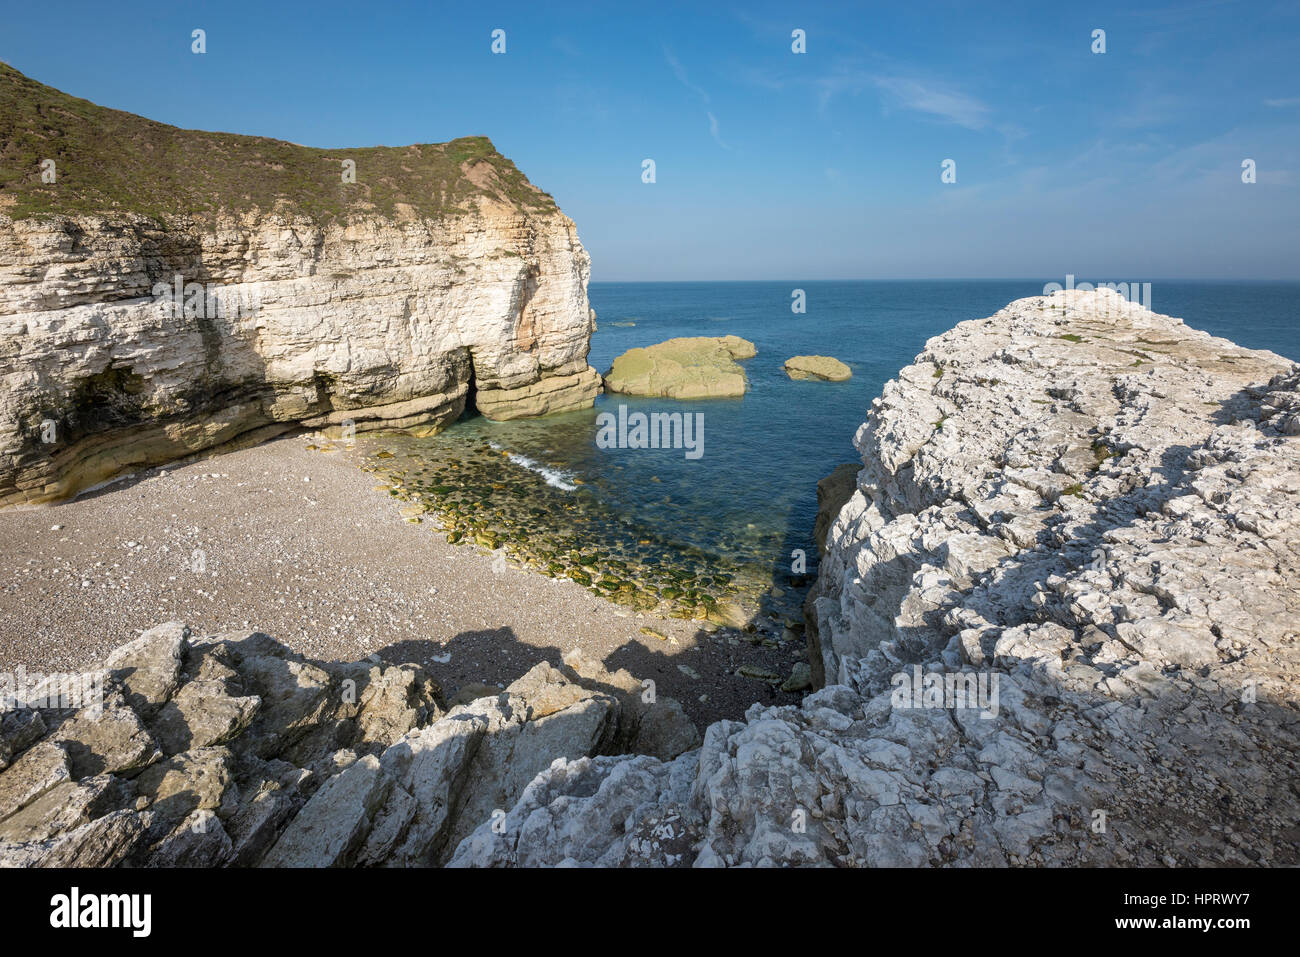 Beautiful pebbly beach at Thornwick bay, Flamborough head on the  east coast of England. A popular tourist destination with stunning scenery. Stock Photo